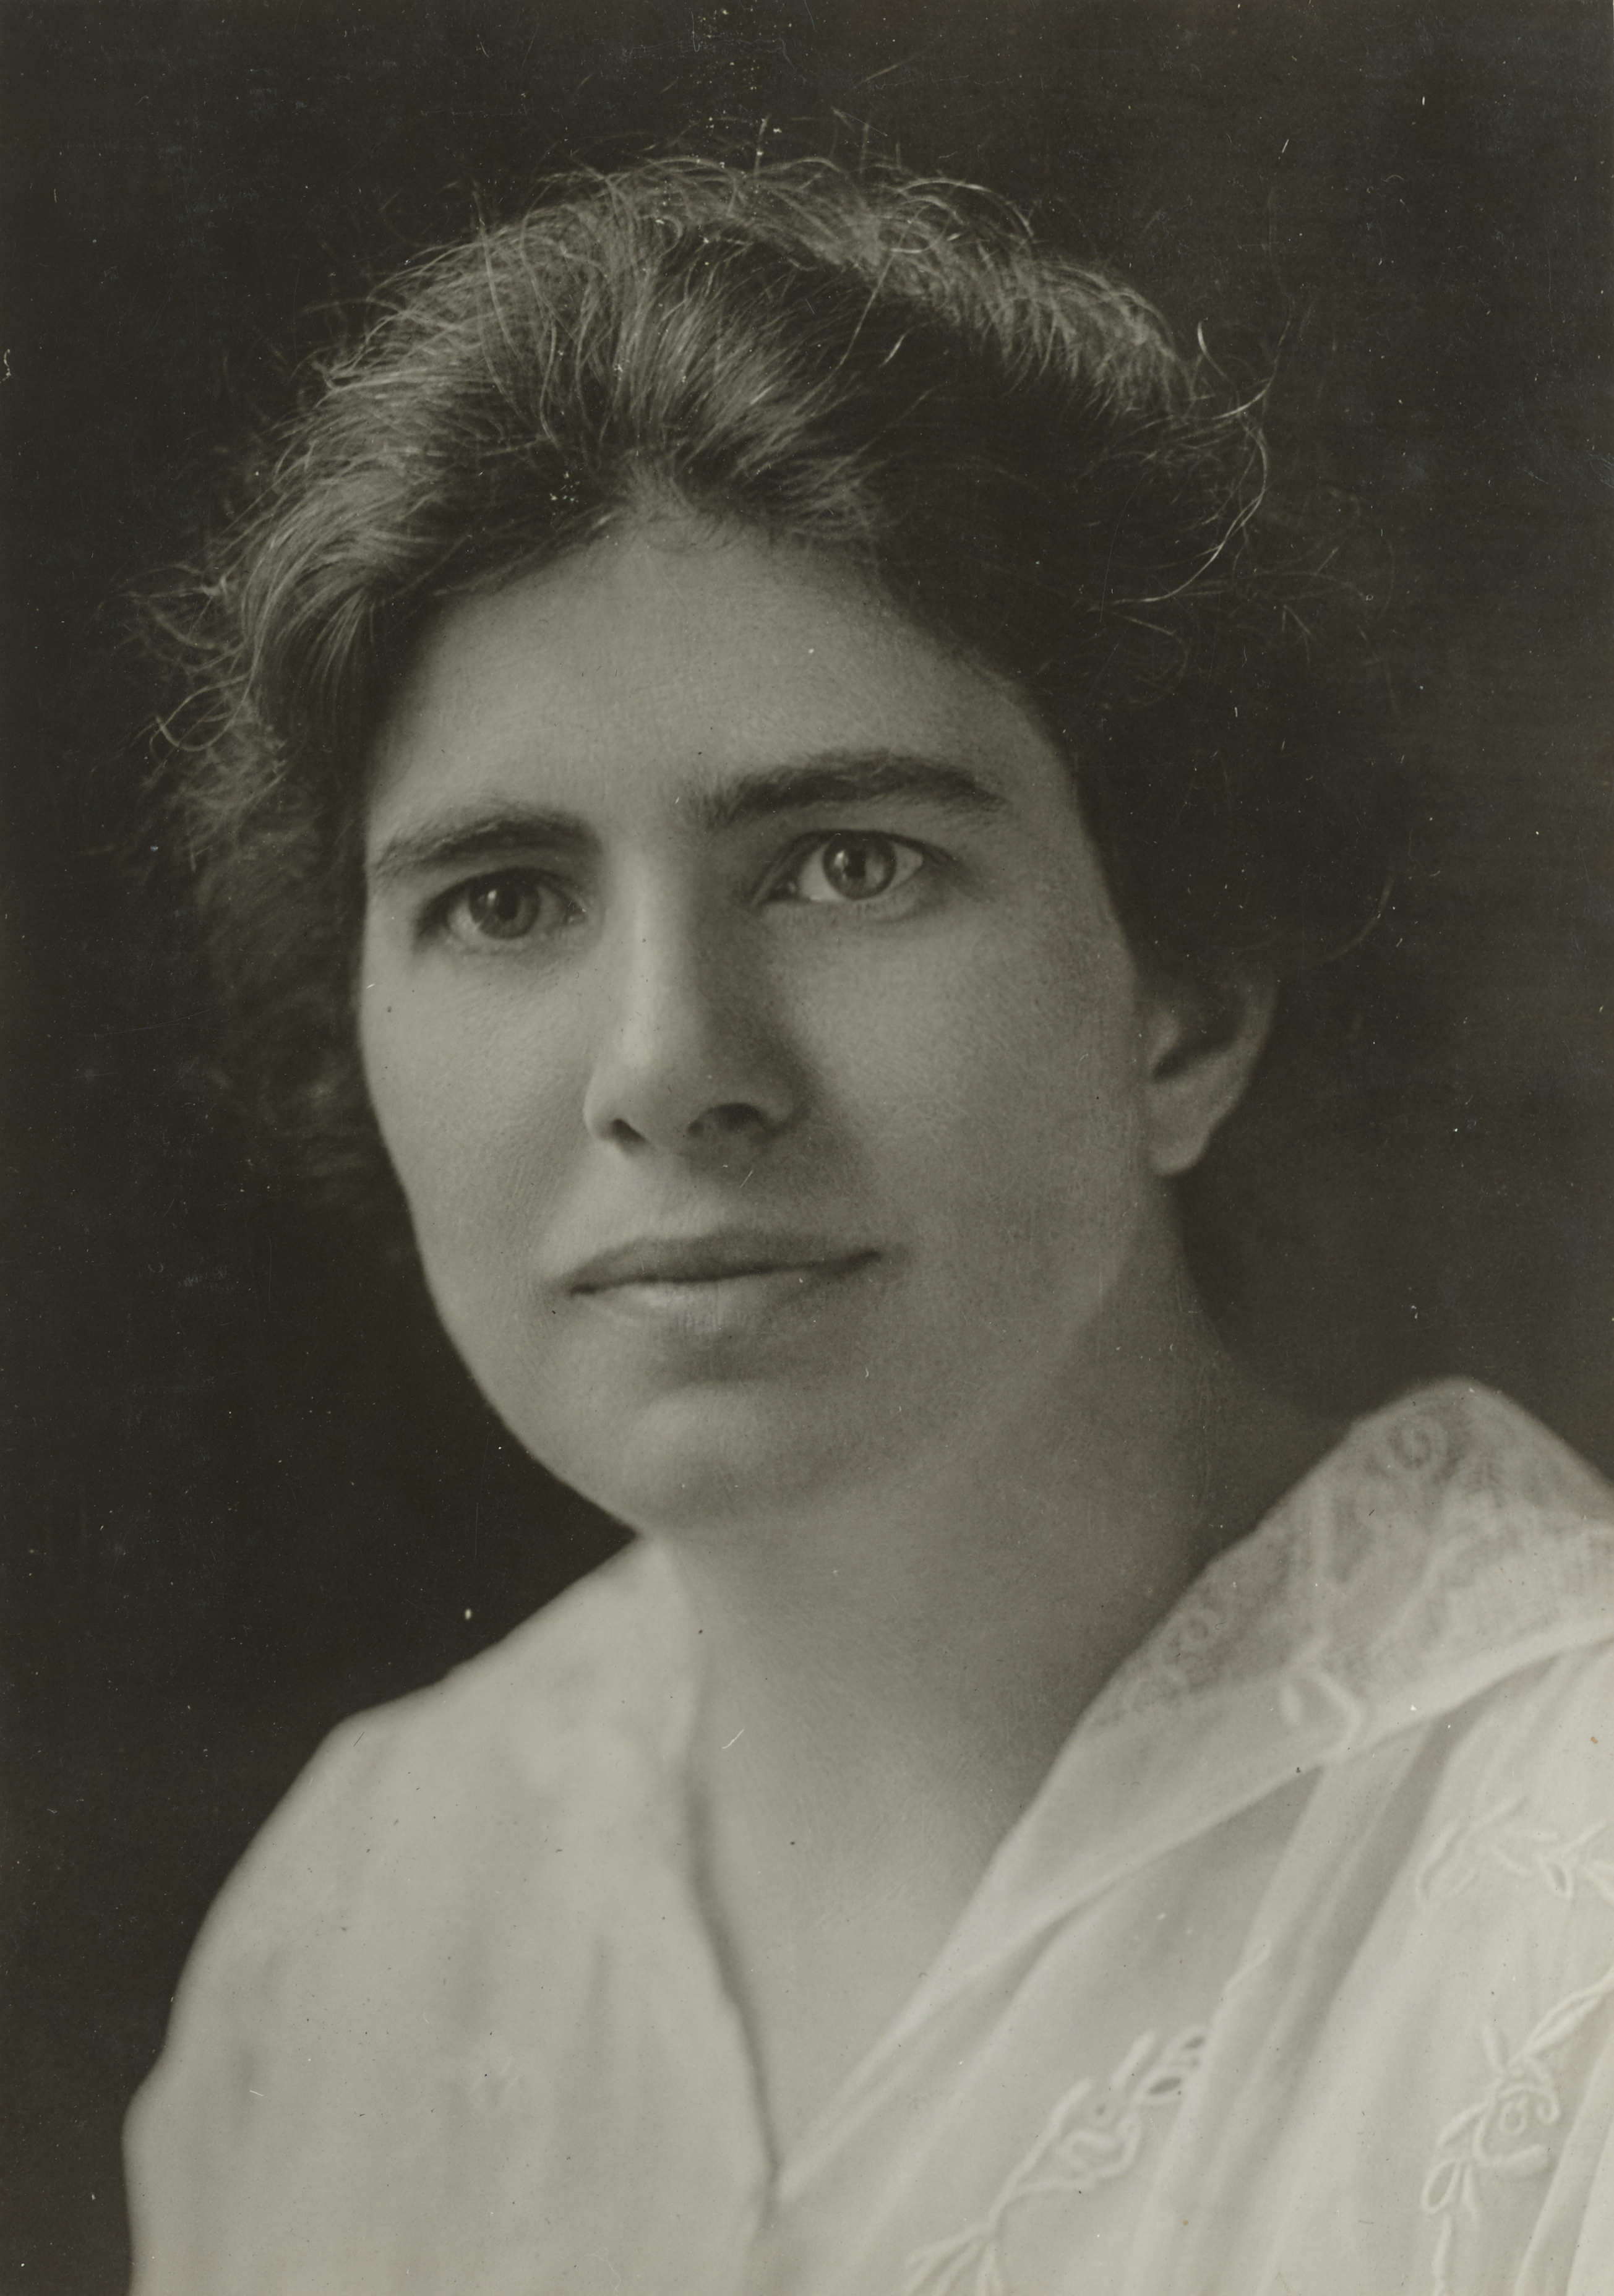 Patterson in 1918